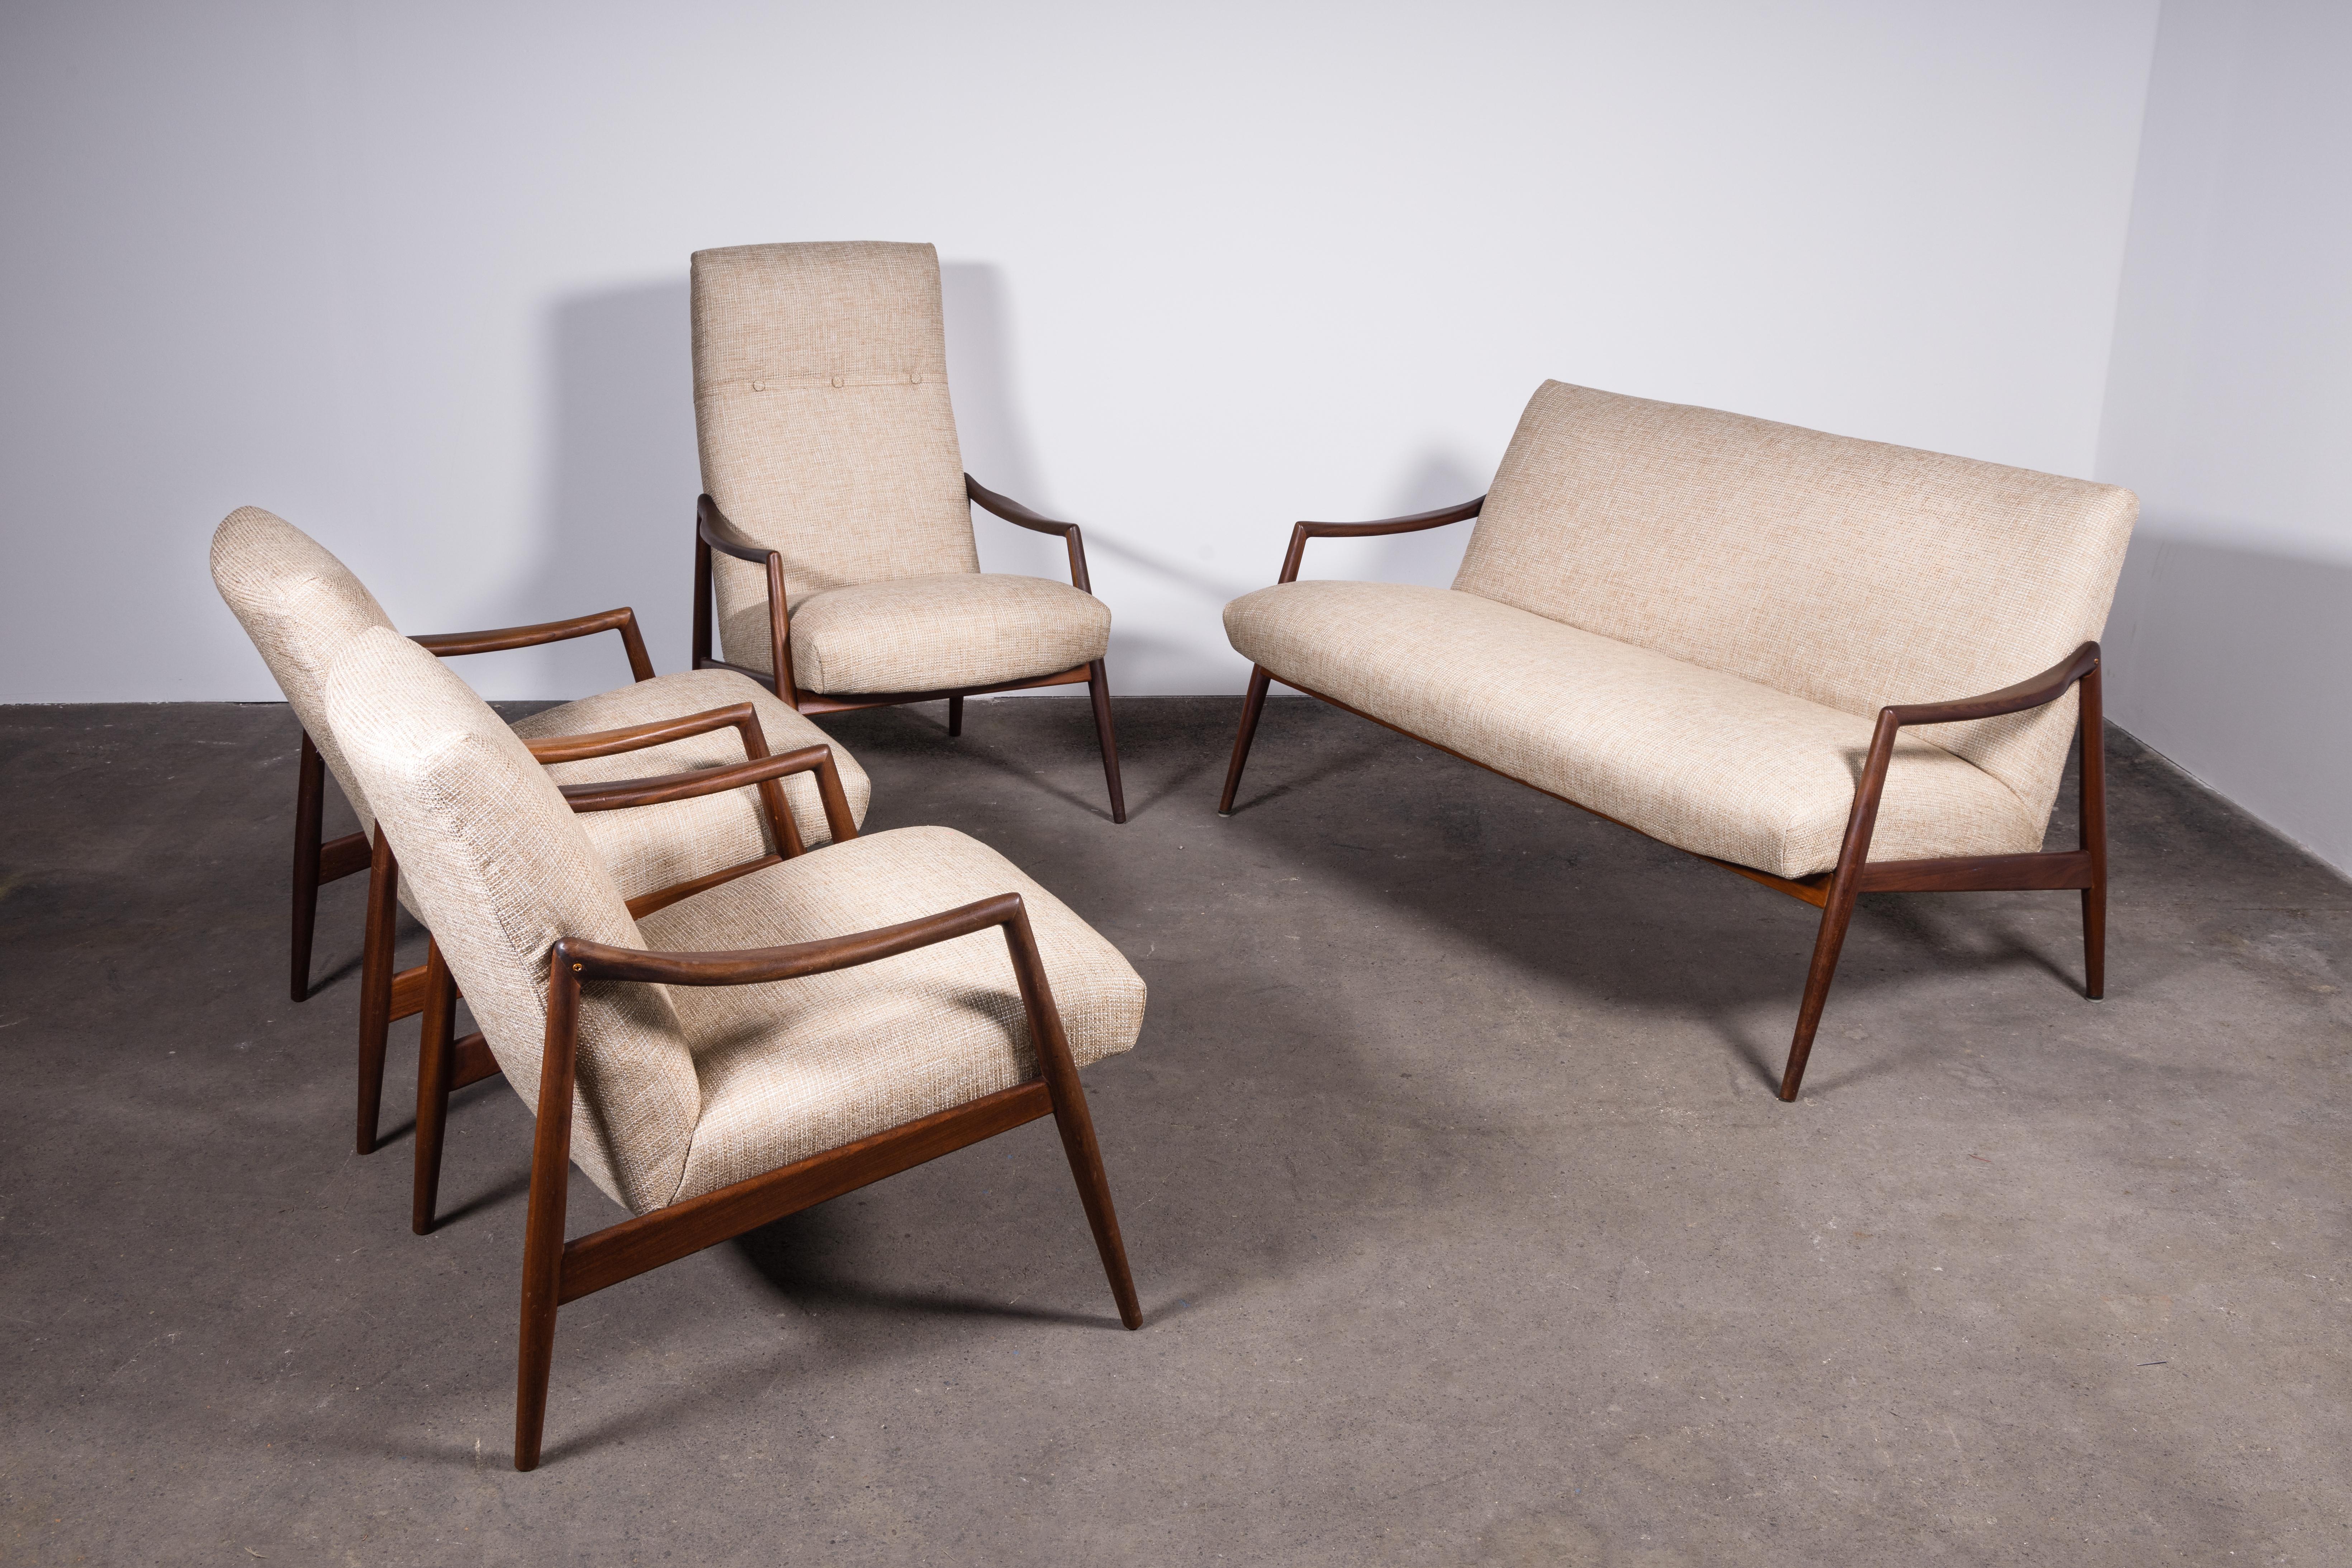 Pair of 1950s Teak Armchairs by Hartmut Lohmeyer Upholstered à la Coco Chanel 1